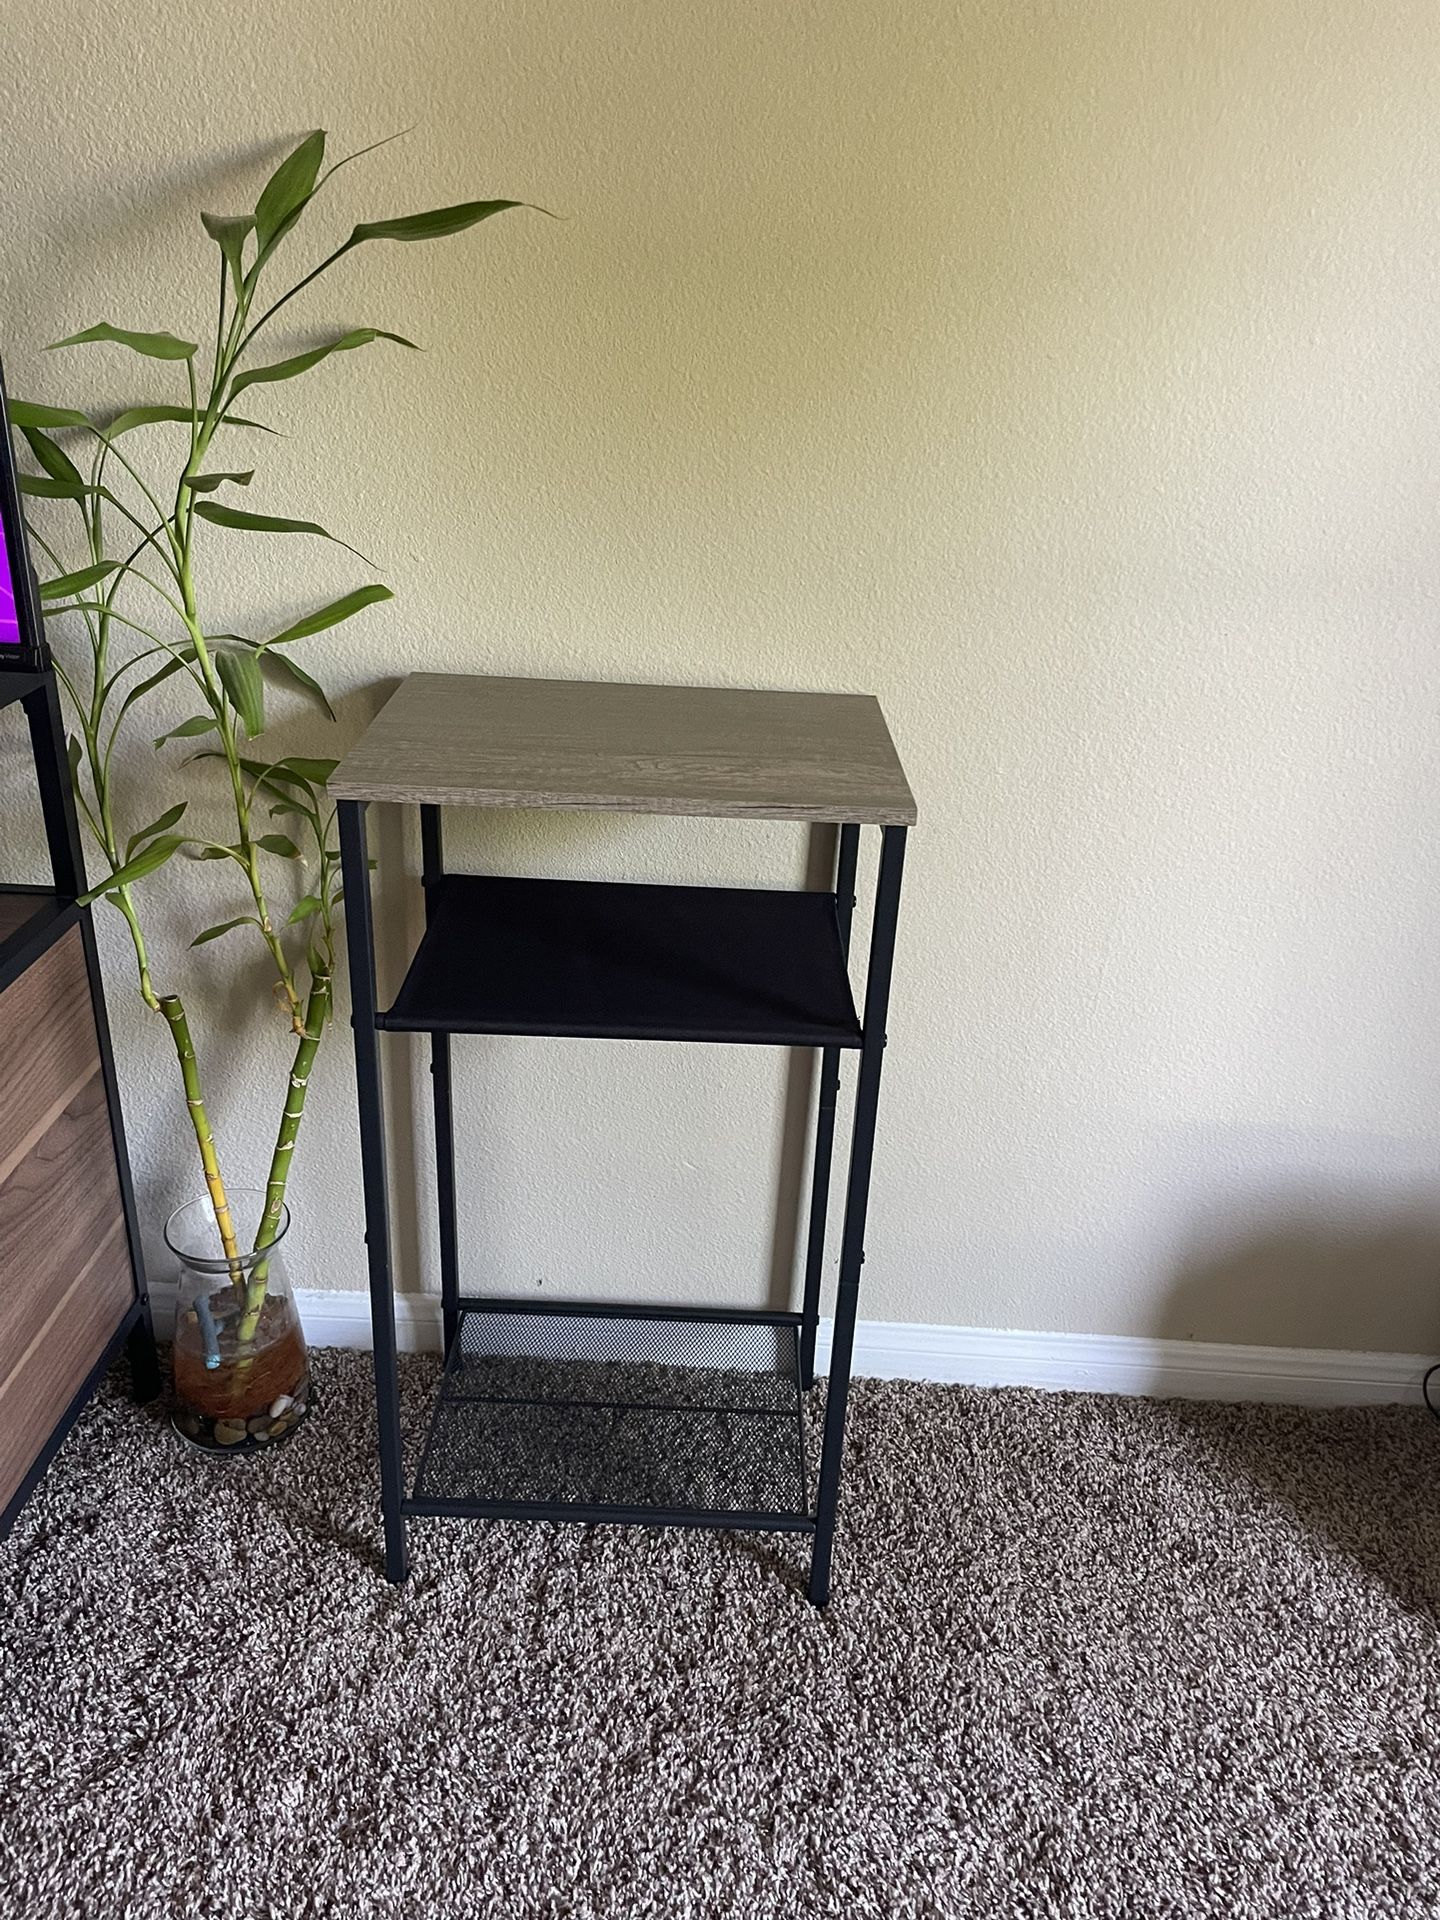 3 Tier End Table, Telephone Table, Tall Side Table With Storage, Small Nightstand For Small Spaces, Metal Frame, For Living Room, Bedroom, Sofa Couch,